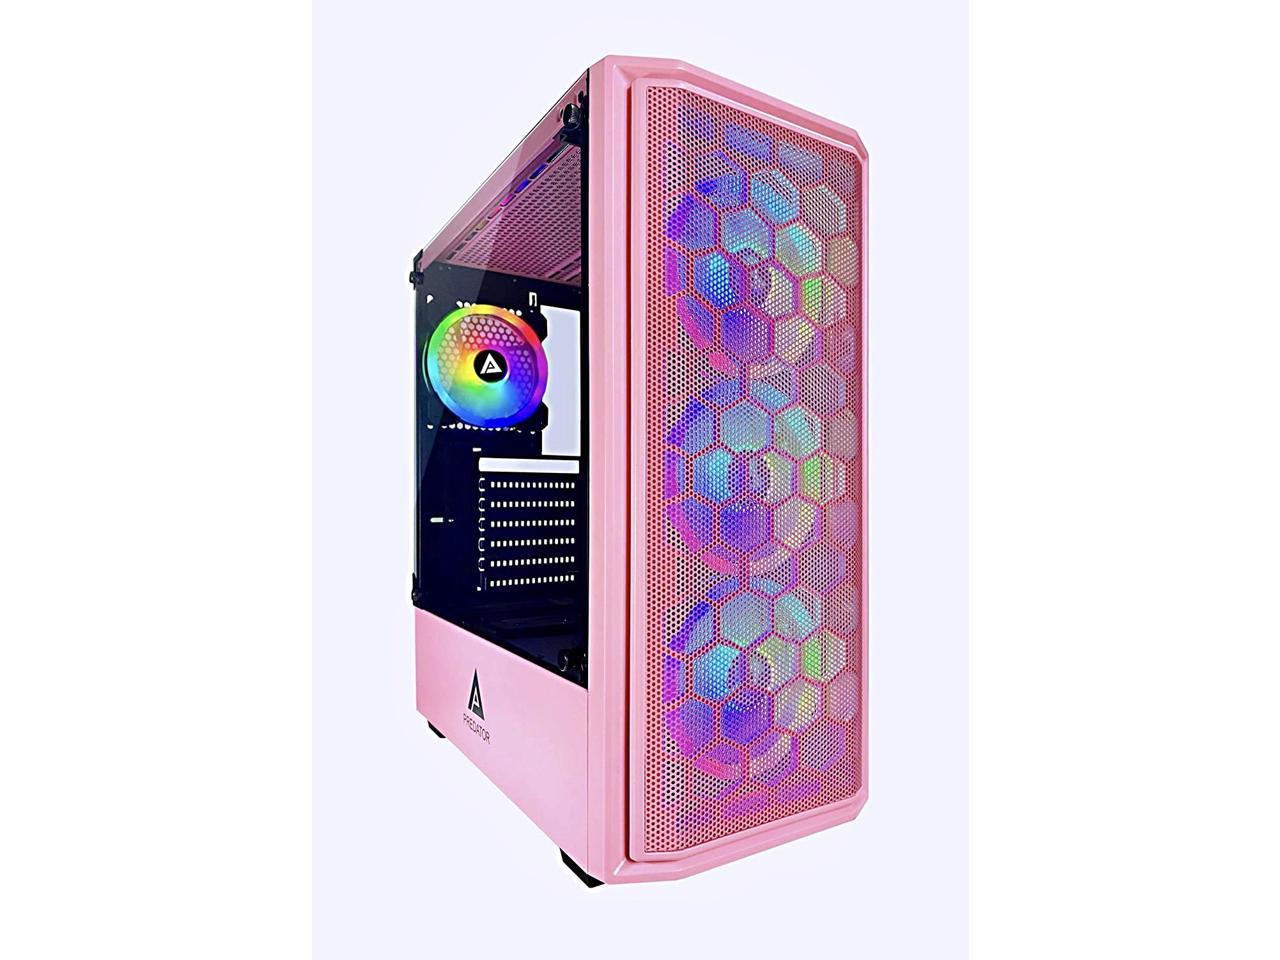 6 x Phoenix RGB Fans Apevia Trinity-P Mid Tower Gaming Case with 4 x Full-Size Tempered Glass Panels Top USB3.0/USB2.0/Audio Ports 